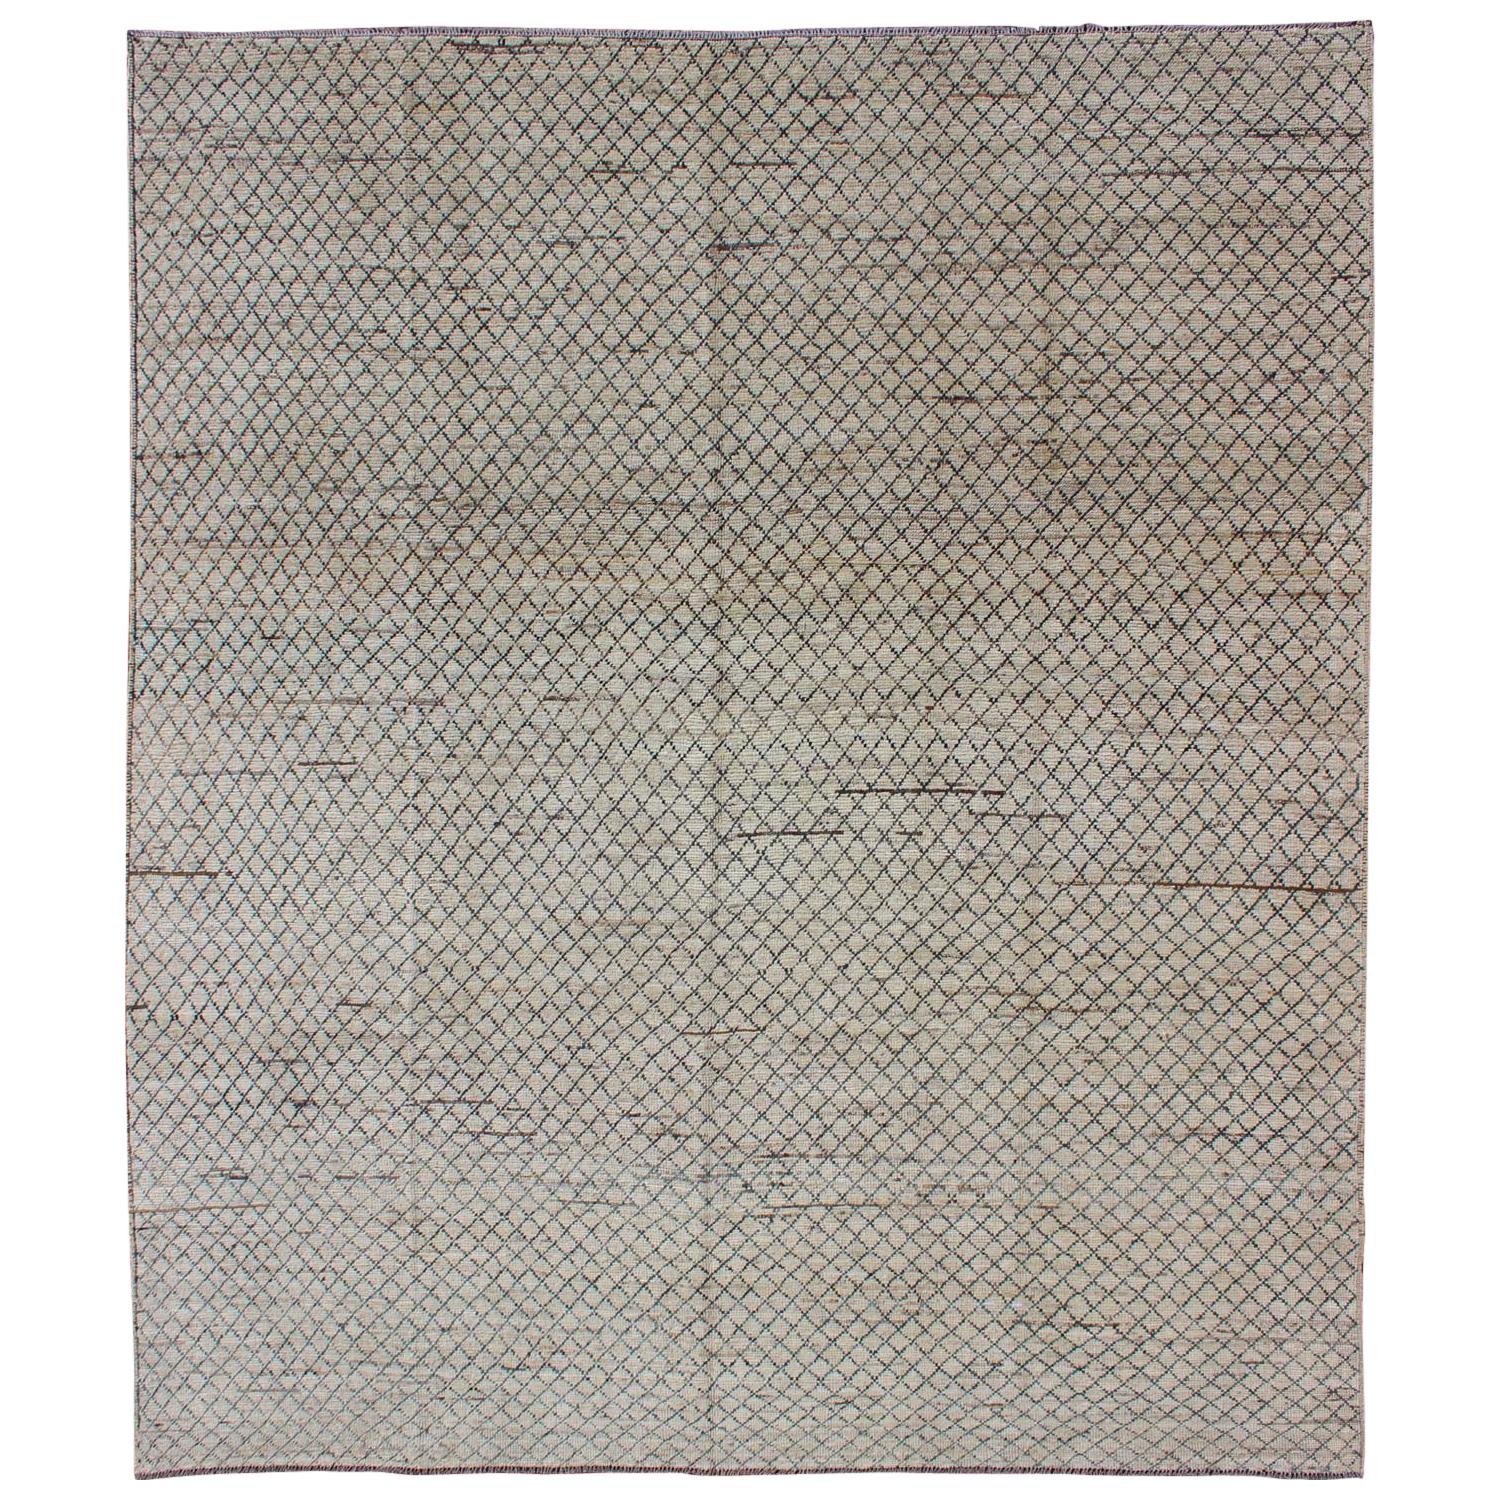 All-Over Modern Afghan Rug Subdued Design in Muted Tones